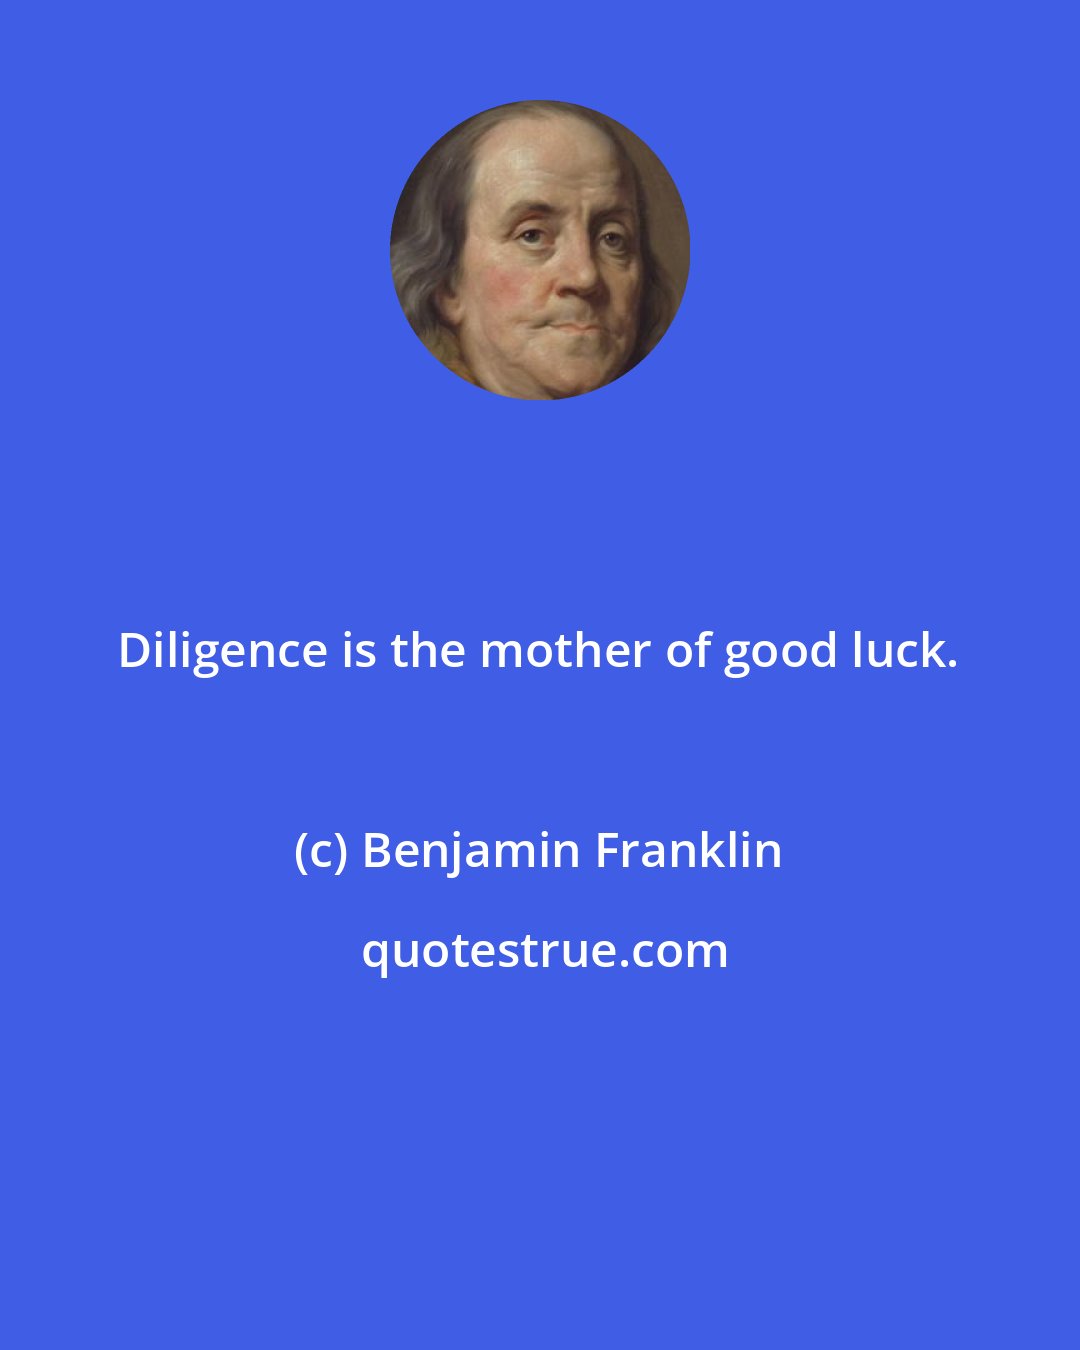 Benjamin Franklin: Diligence is the mother of good luck.